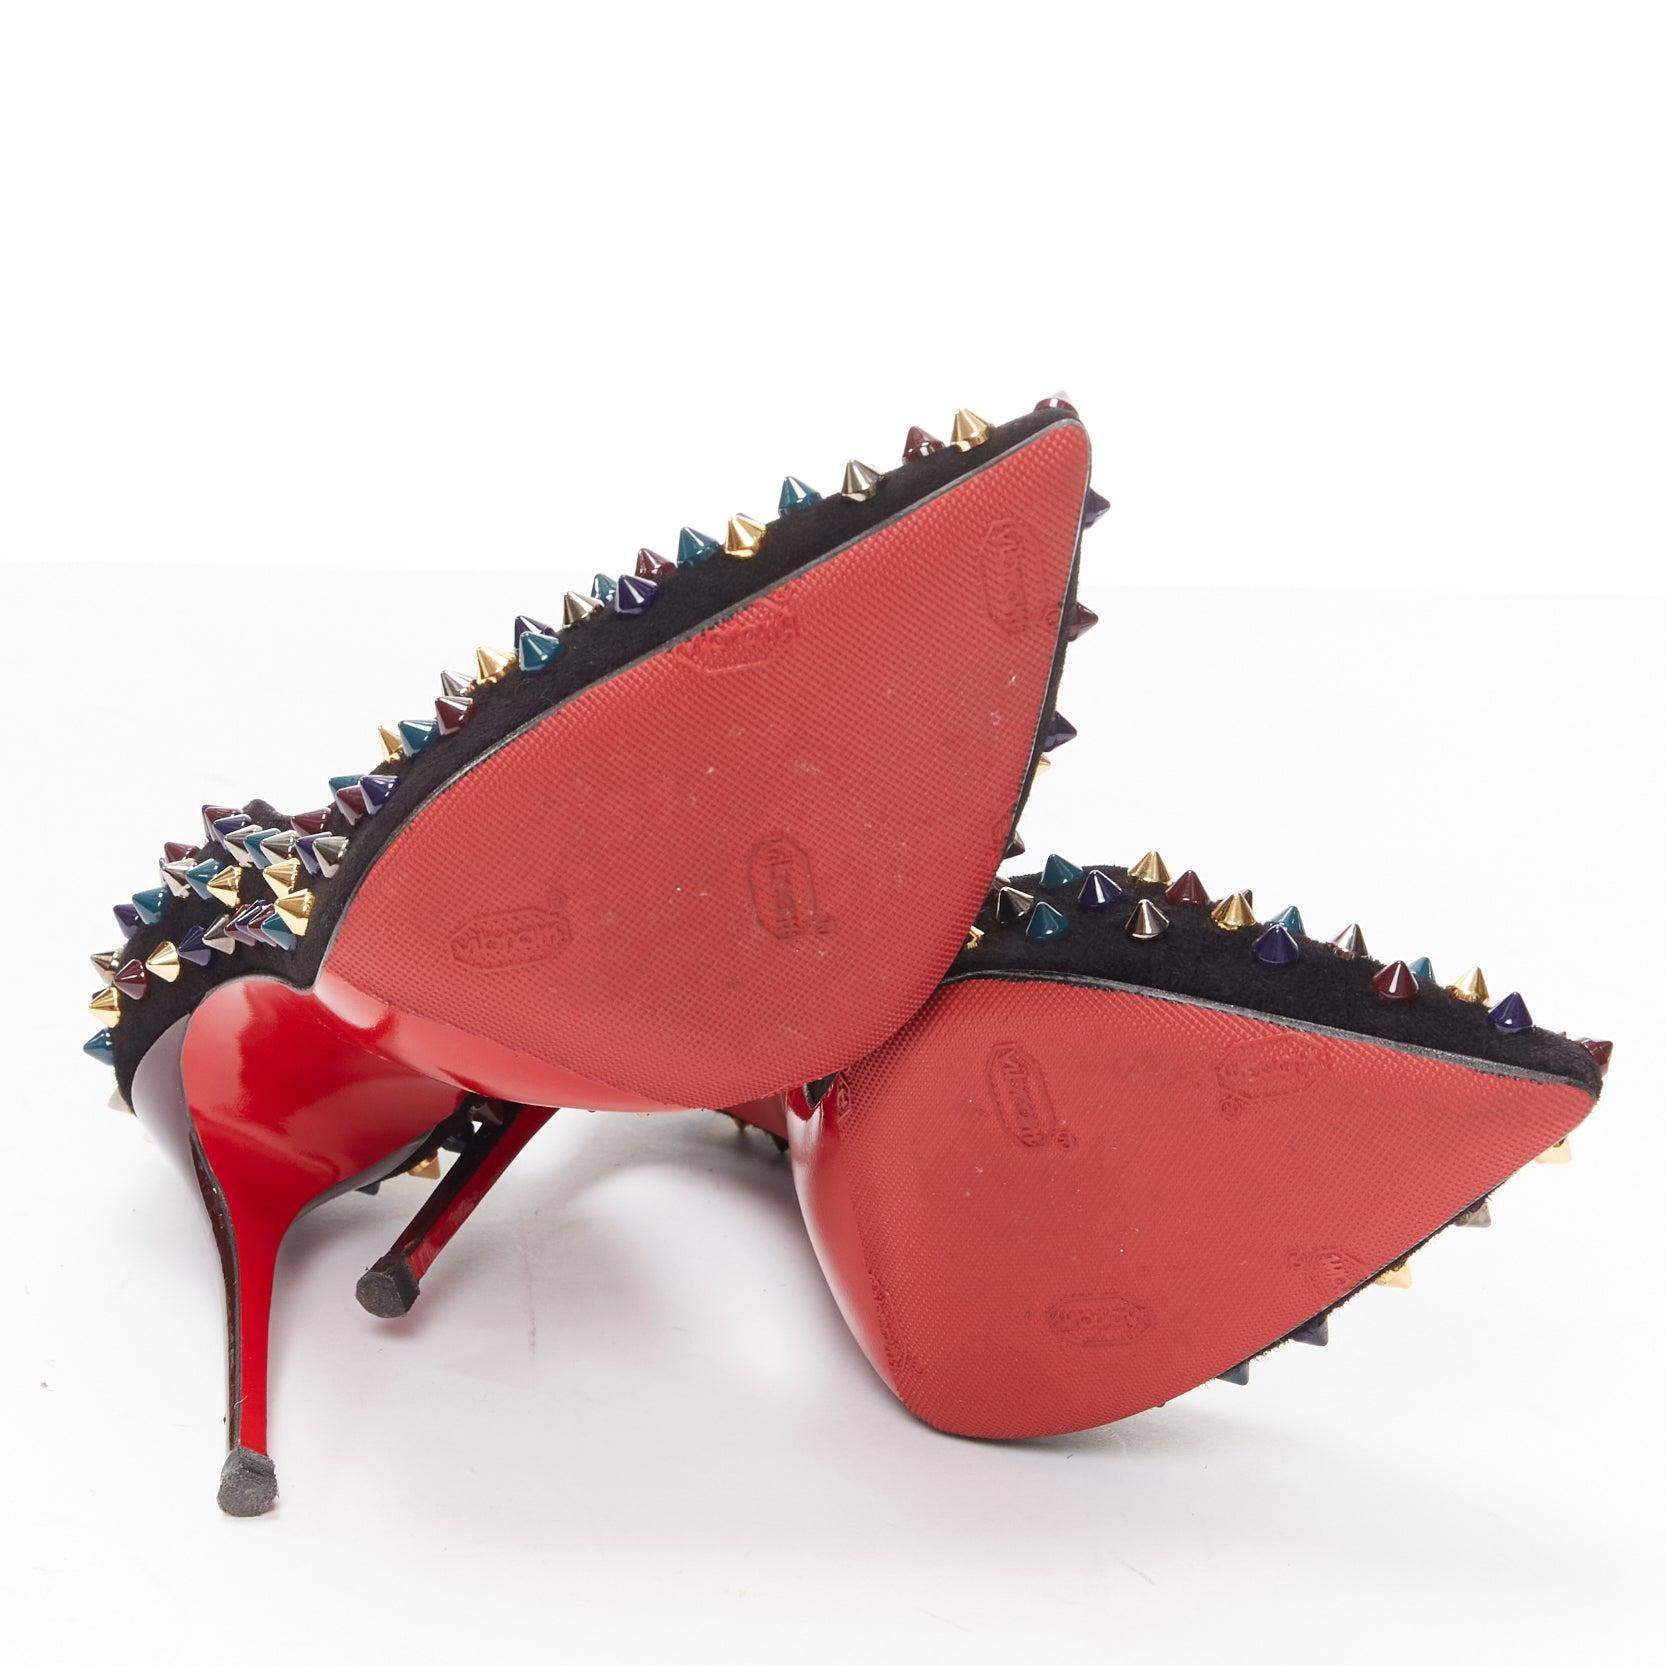 CHRISITAN LOUBOUTI Follies Spikes black suede jewely tone spike pigalle EU36 For Sale 7